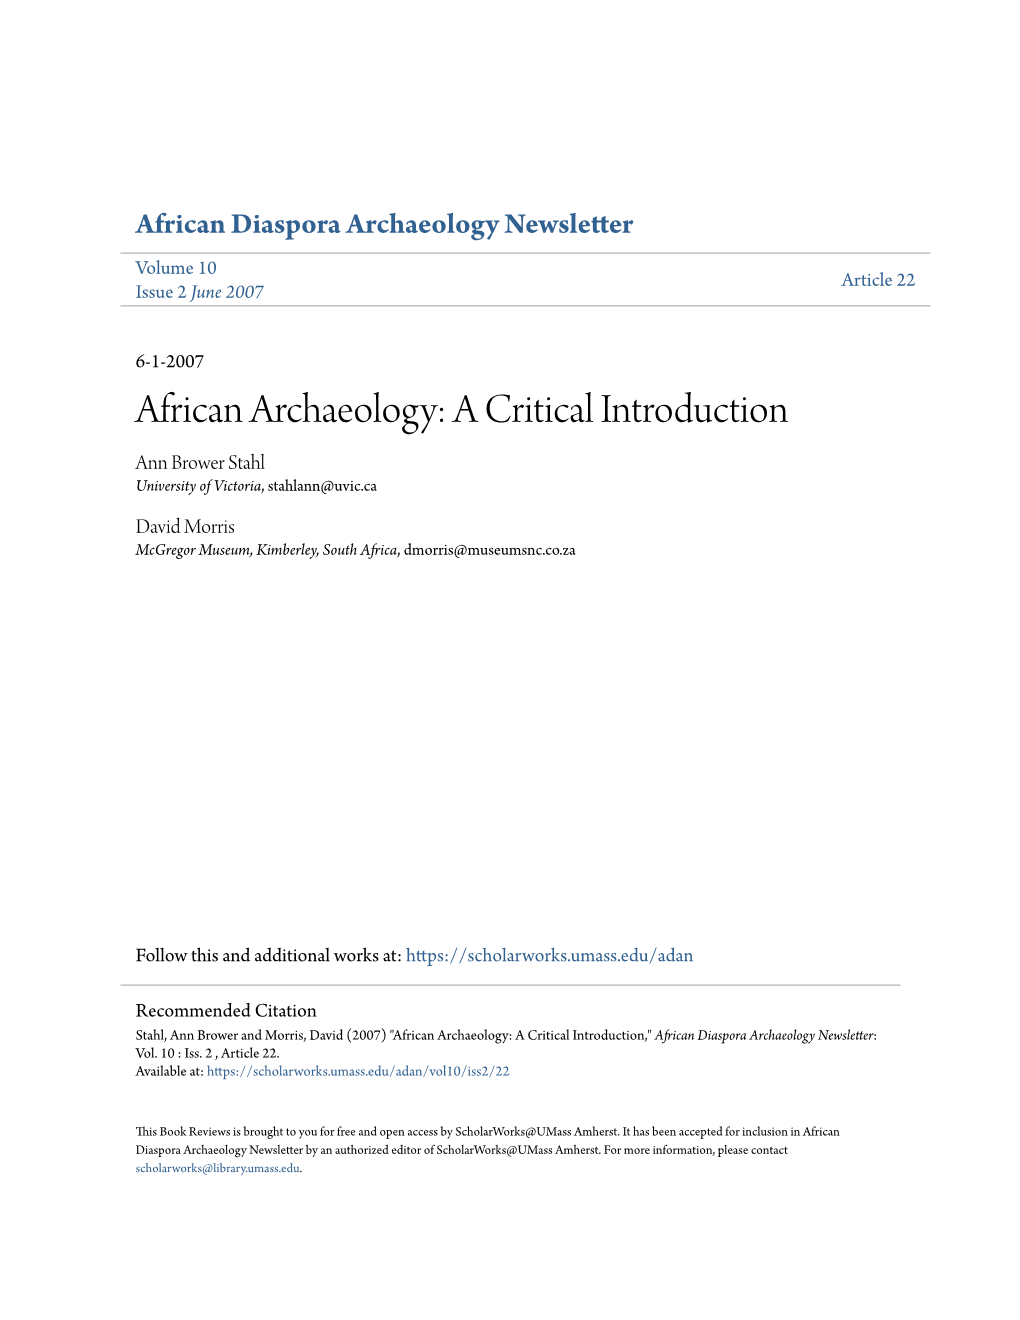 African Archaeology: a Critical Introduction Ann Brower Stahl University of Victoria, Stahlann@Uvic.Ca